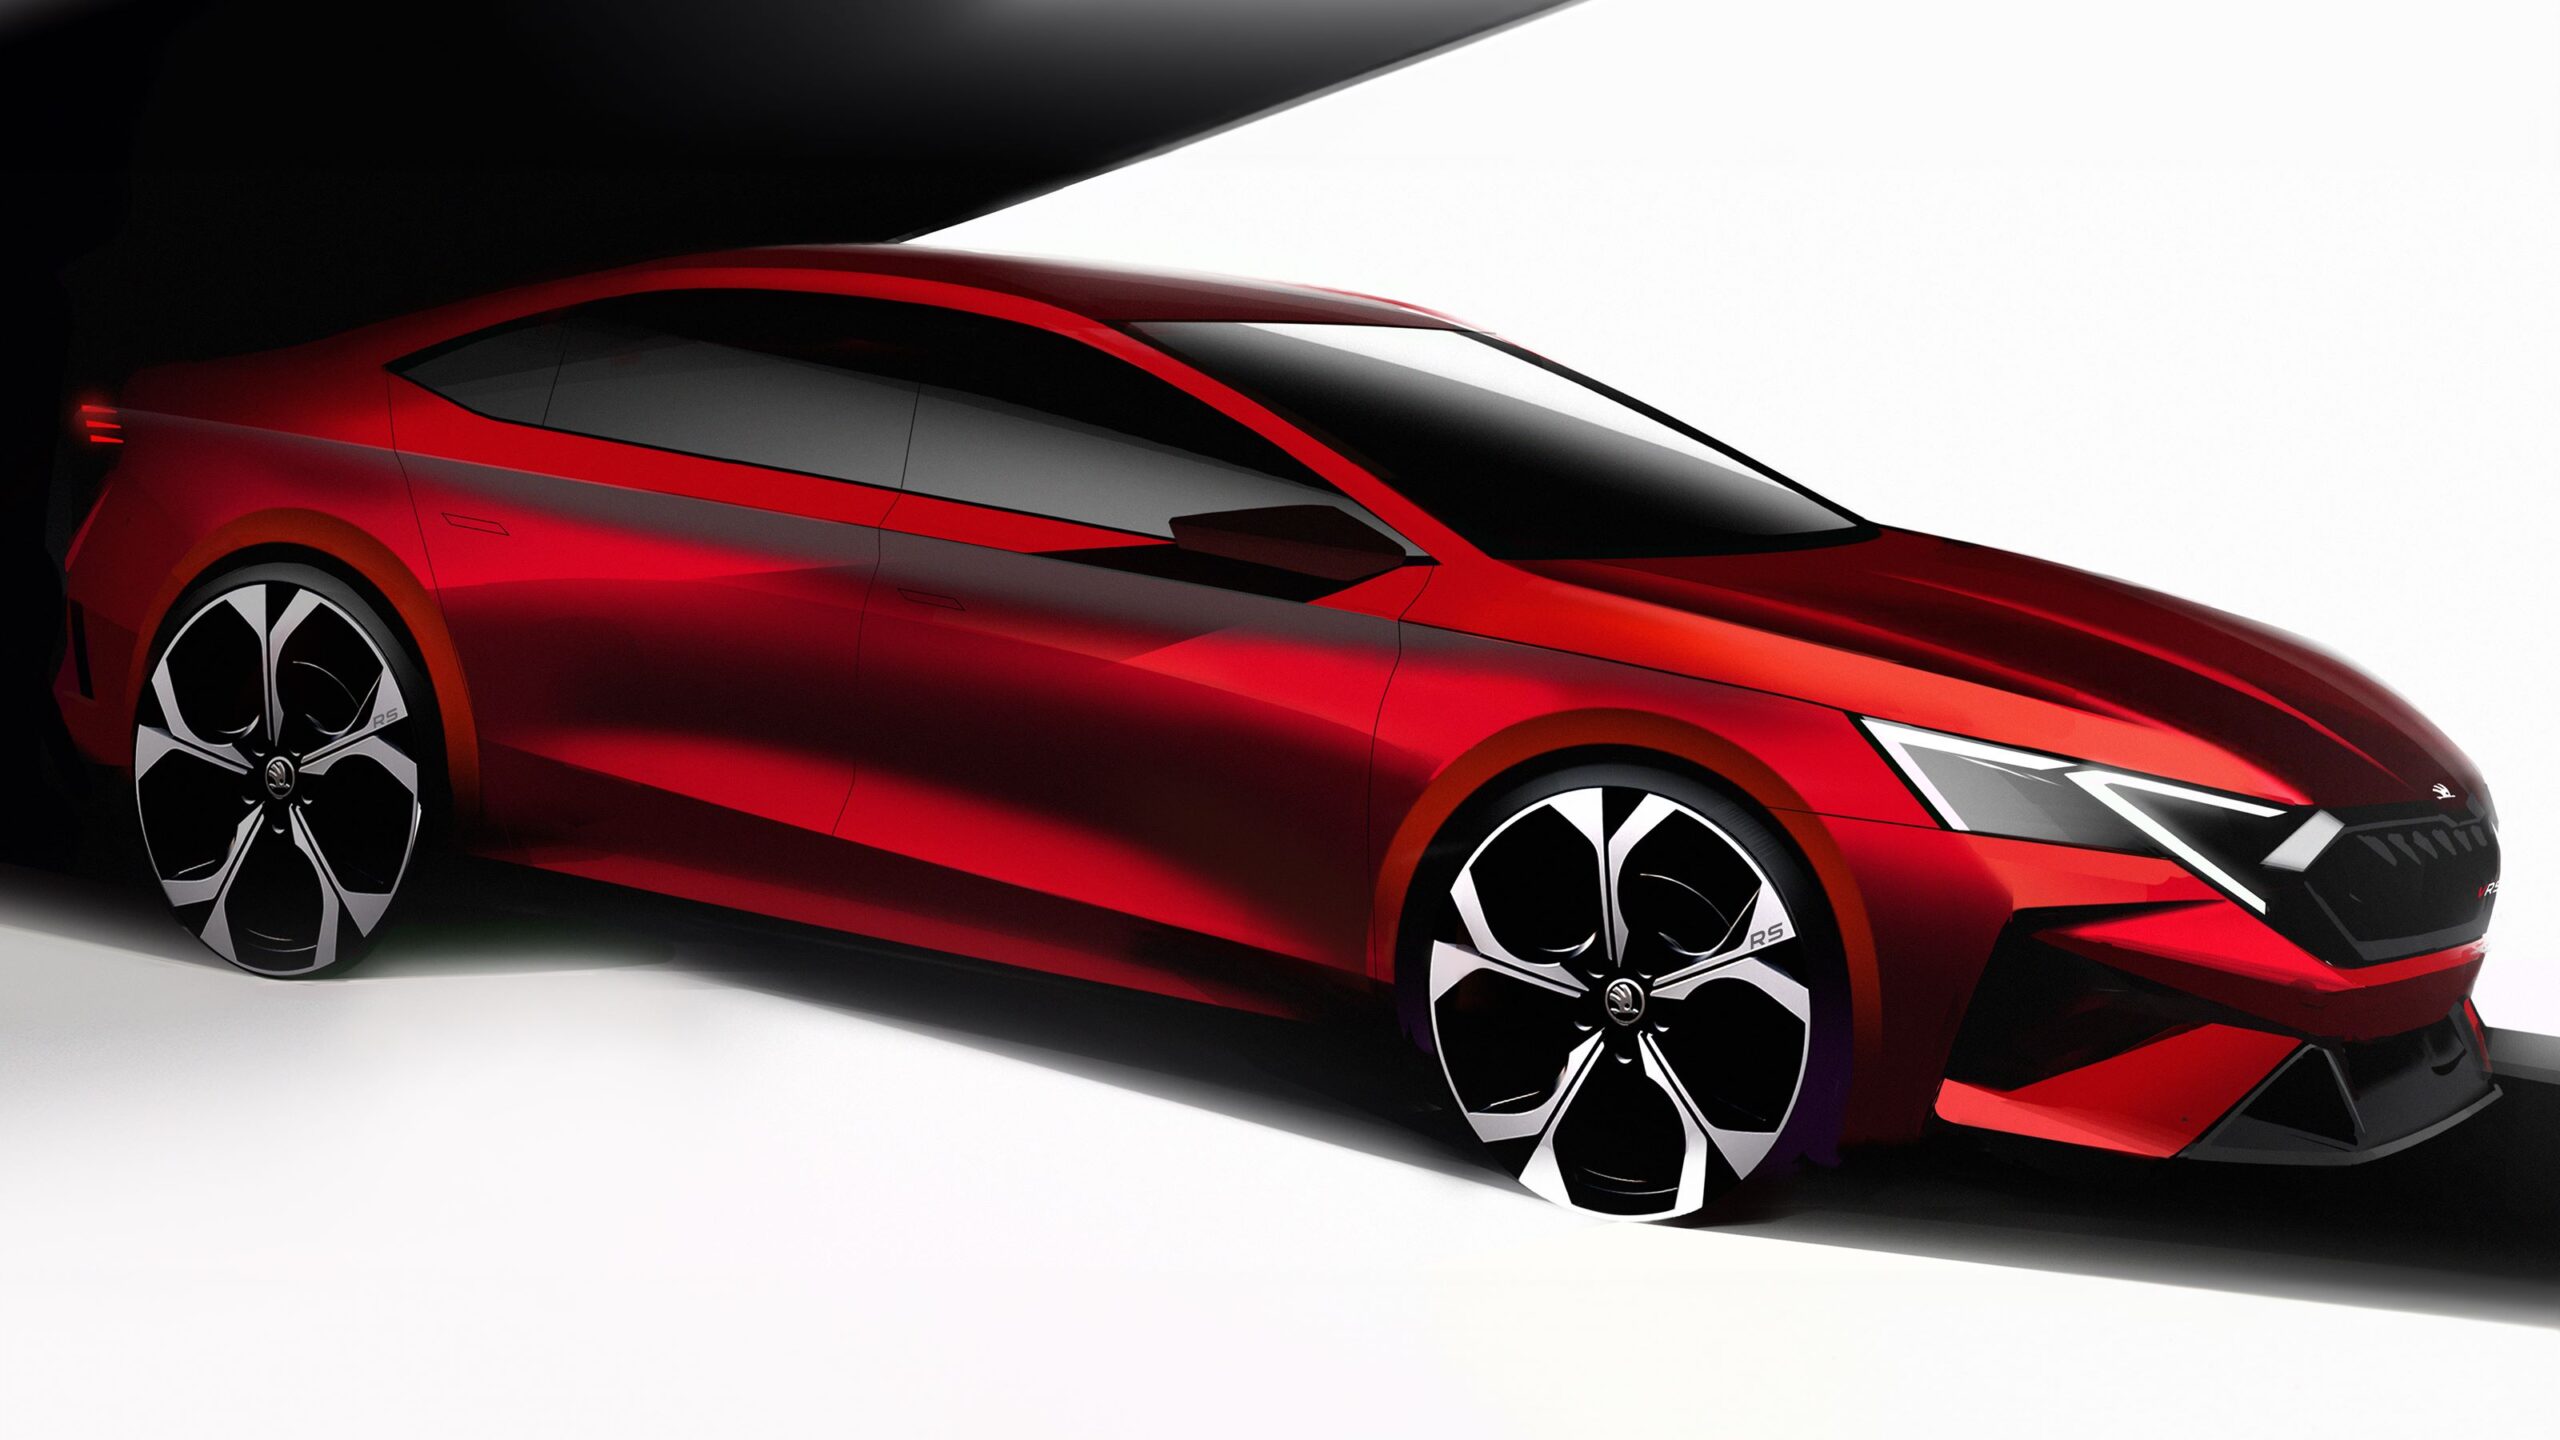 Sketch of a Skoda Octavia RS to be unveiled later in February.